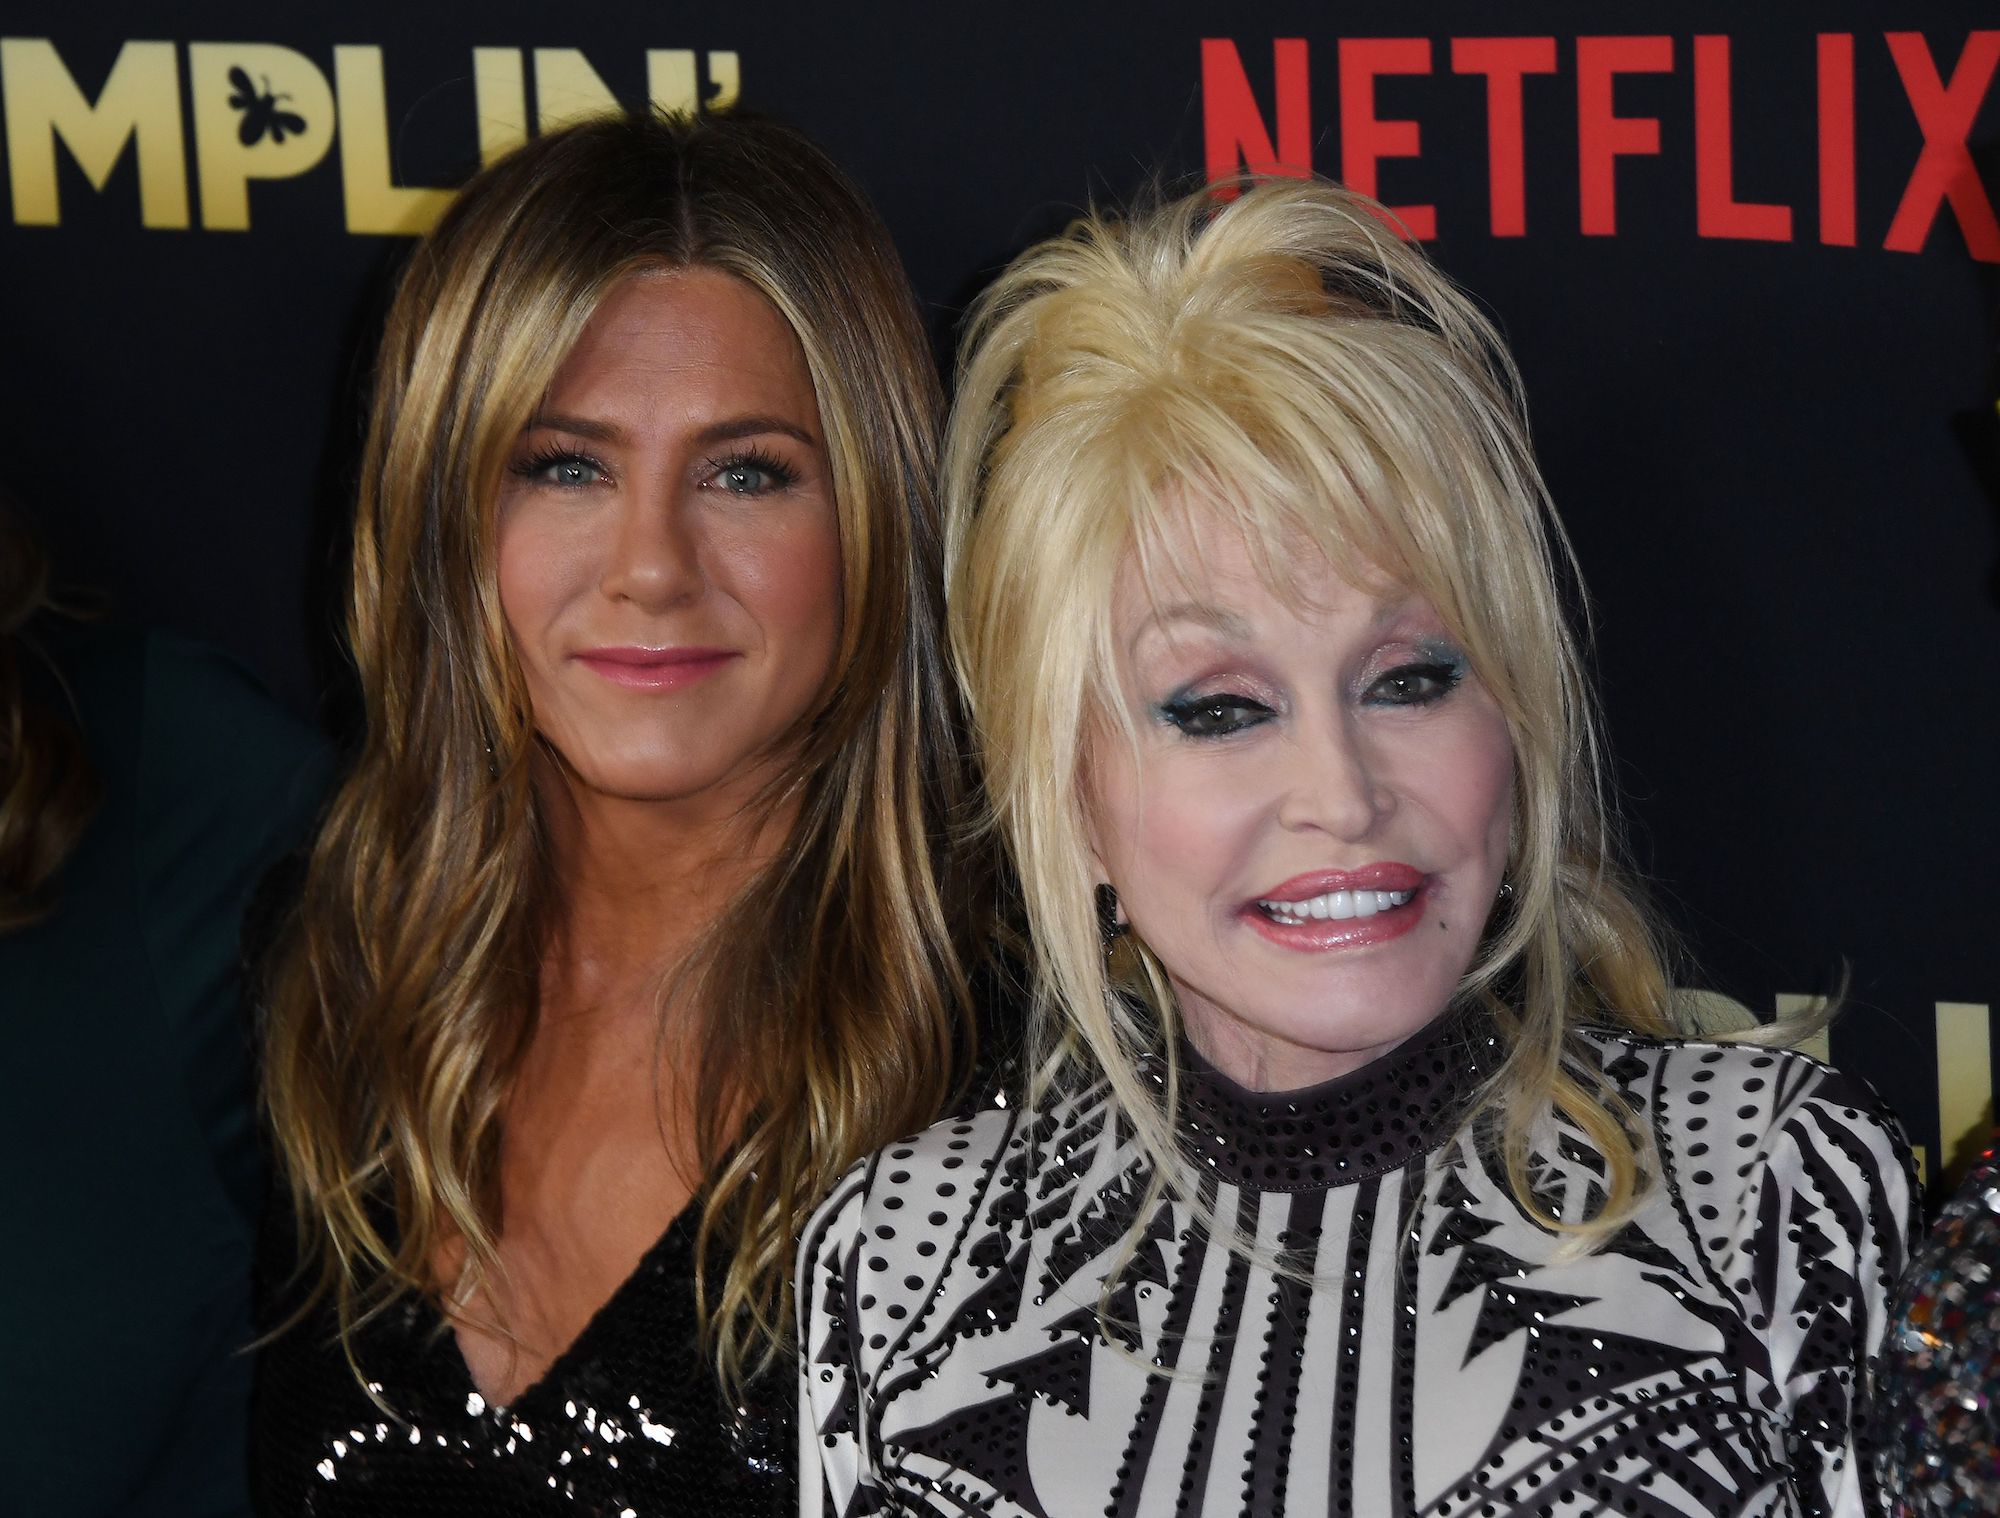 Jennifer Aniston and Dolly Parton attending the premiere of Netflix's 'Dumplin' in 2018